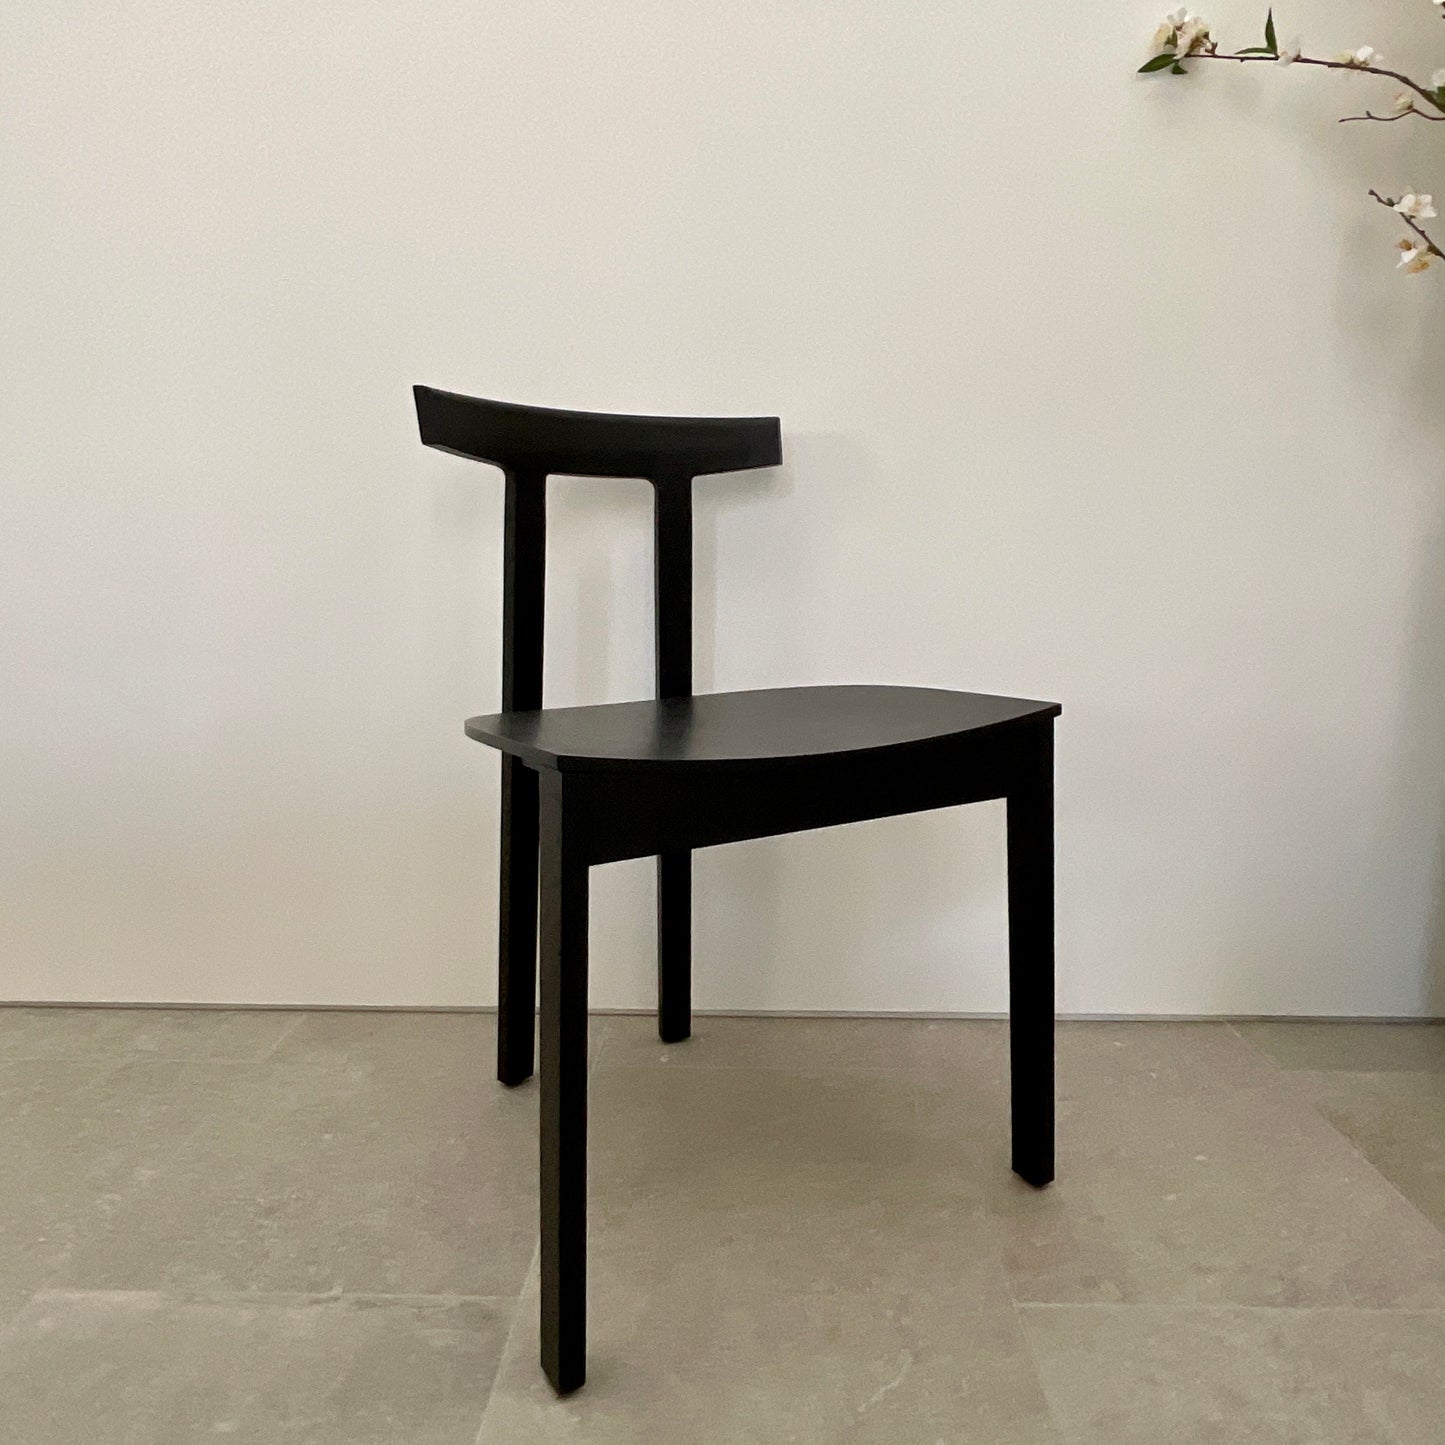 Set of FOUR Torii Dining Chairs by Niels Bendsten for Bensen (2 sets available)